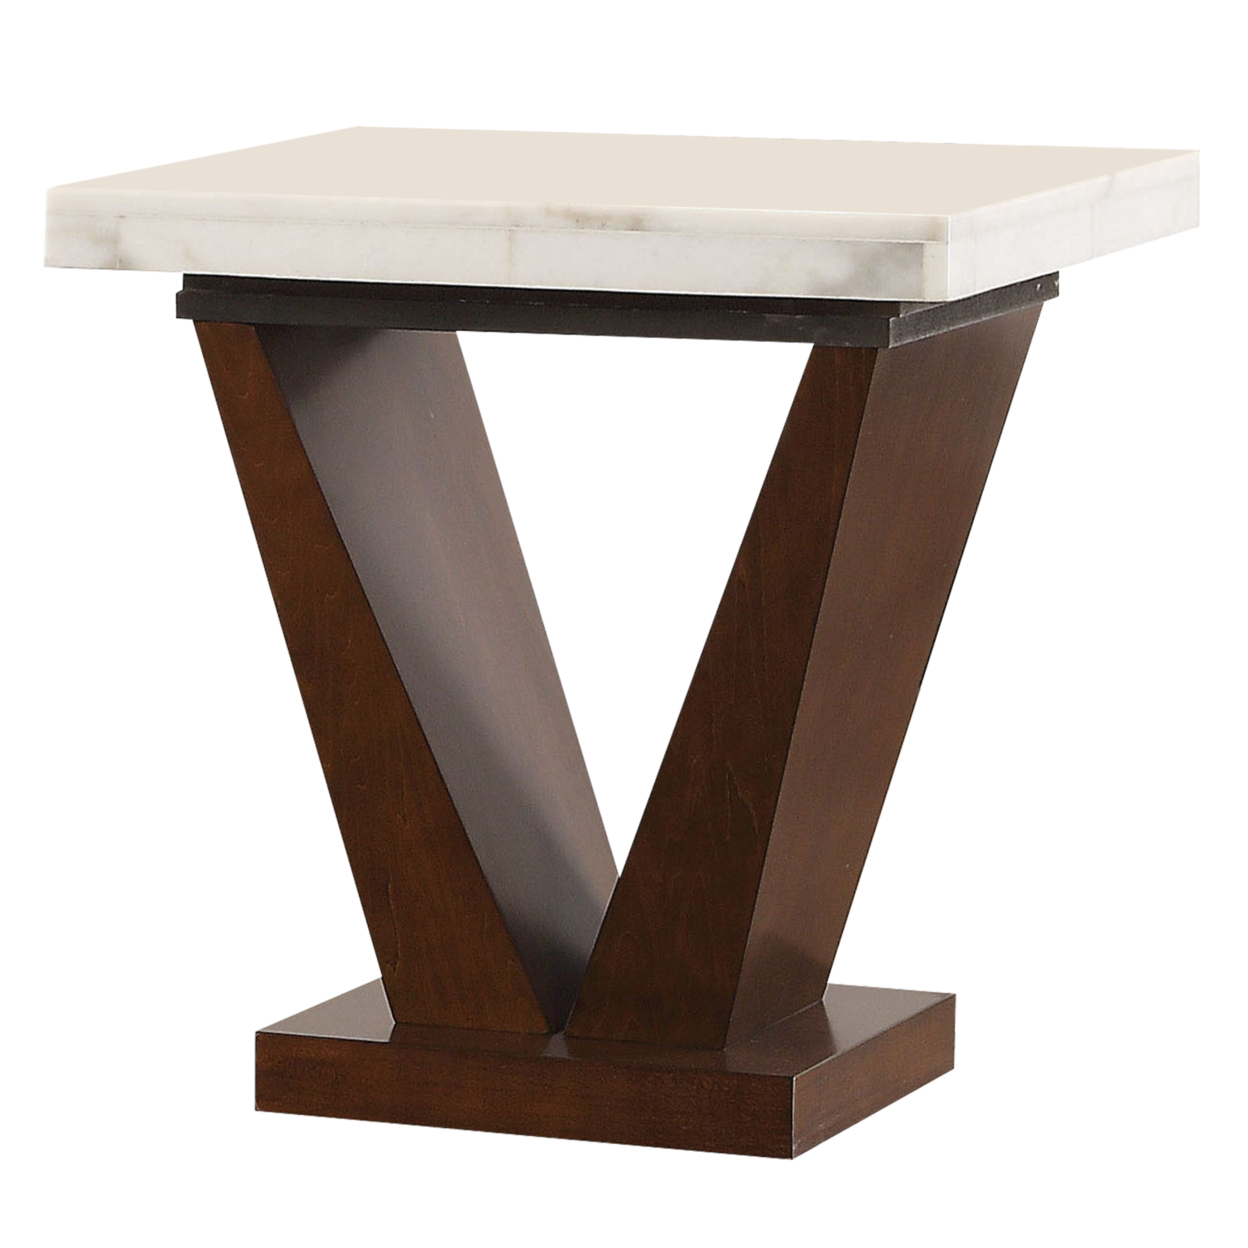 Square Marble Top End Table With Wooden V Shape Base, White And Brown- Saltoro Sherpi